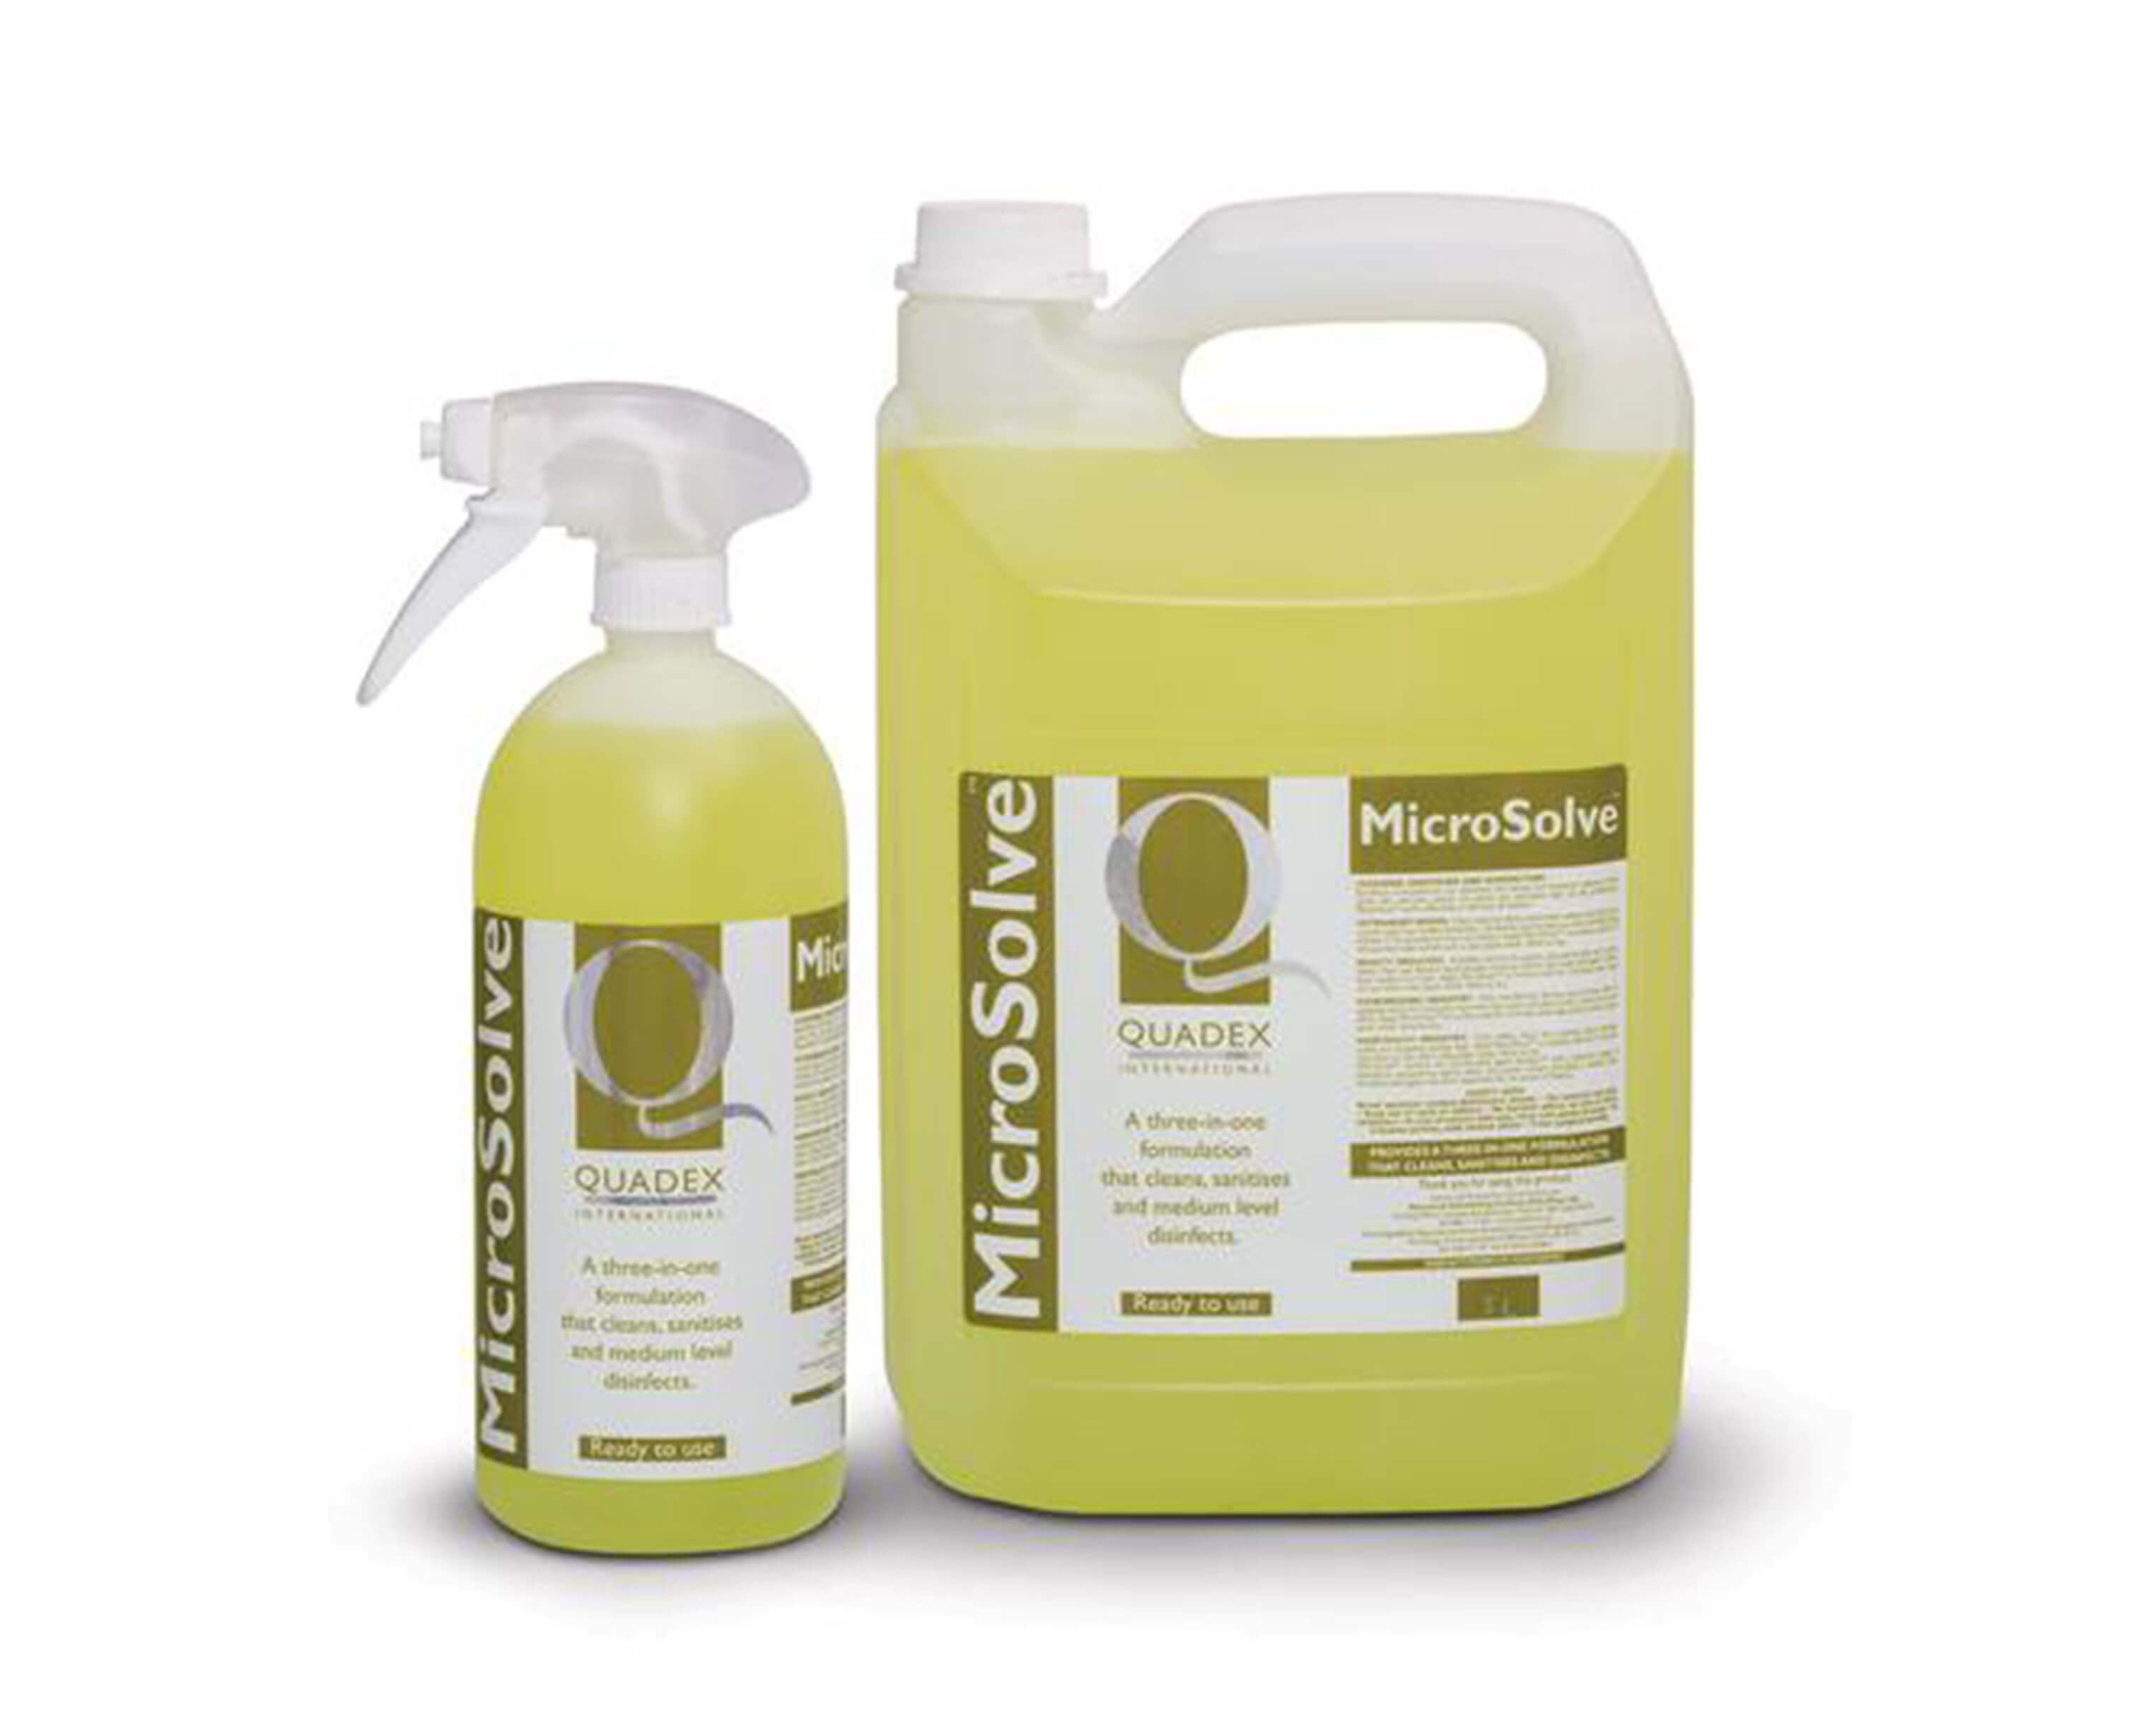 Microsolve - CLEANS, SANITISES & DISINFECTS IN ONE.